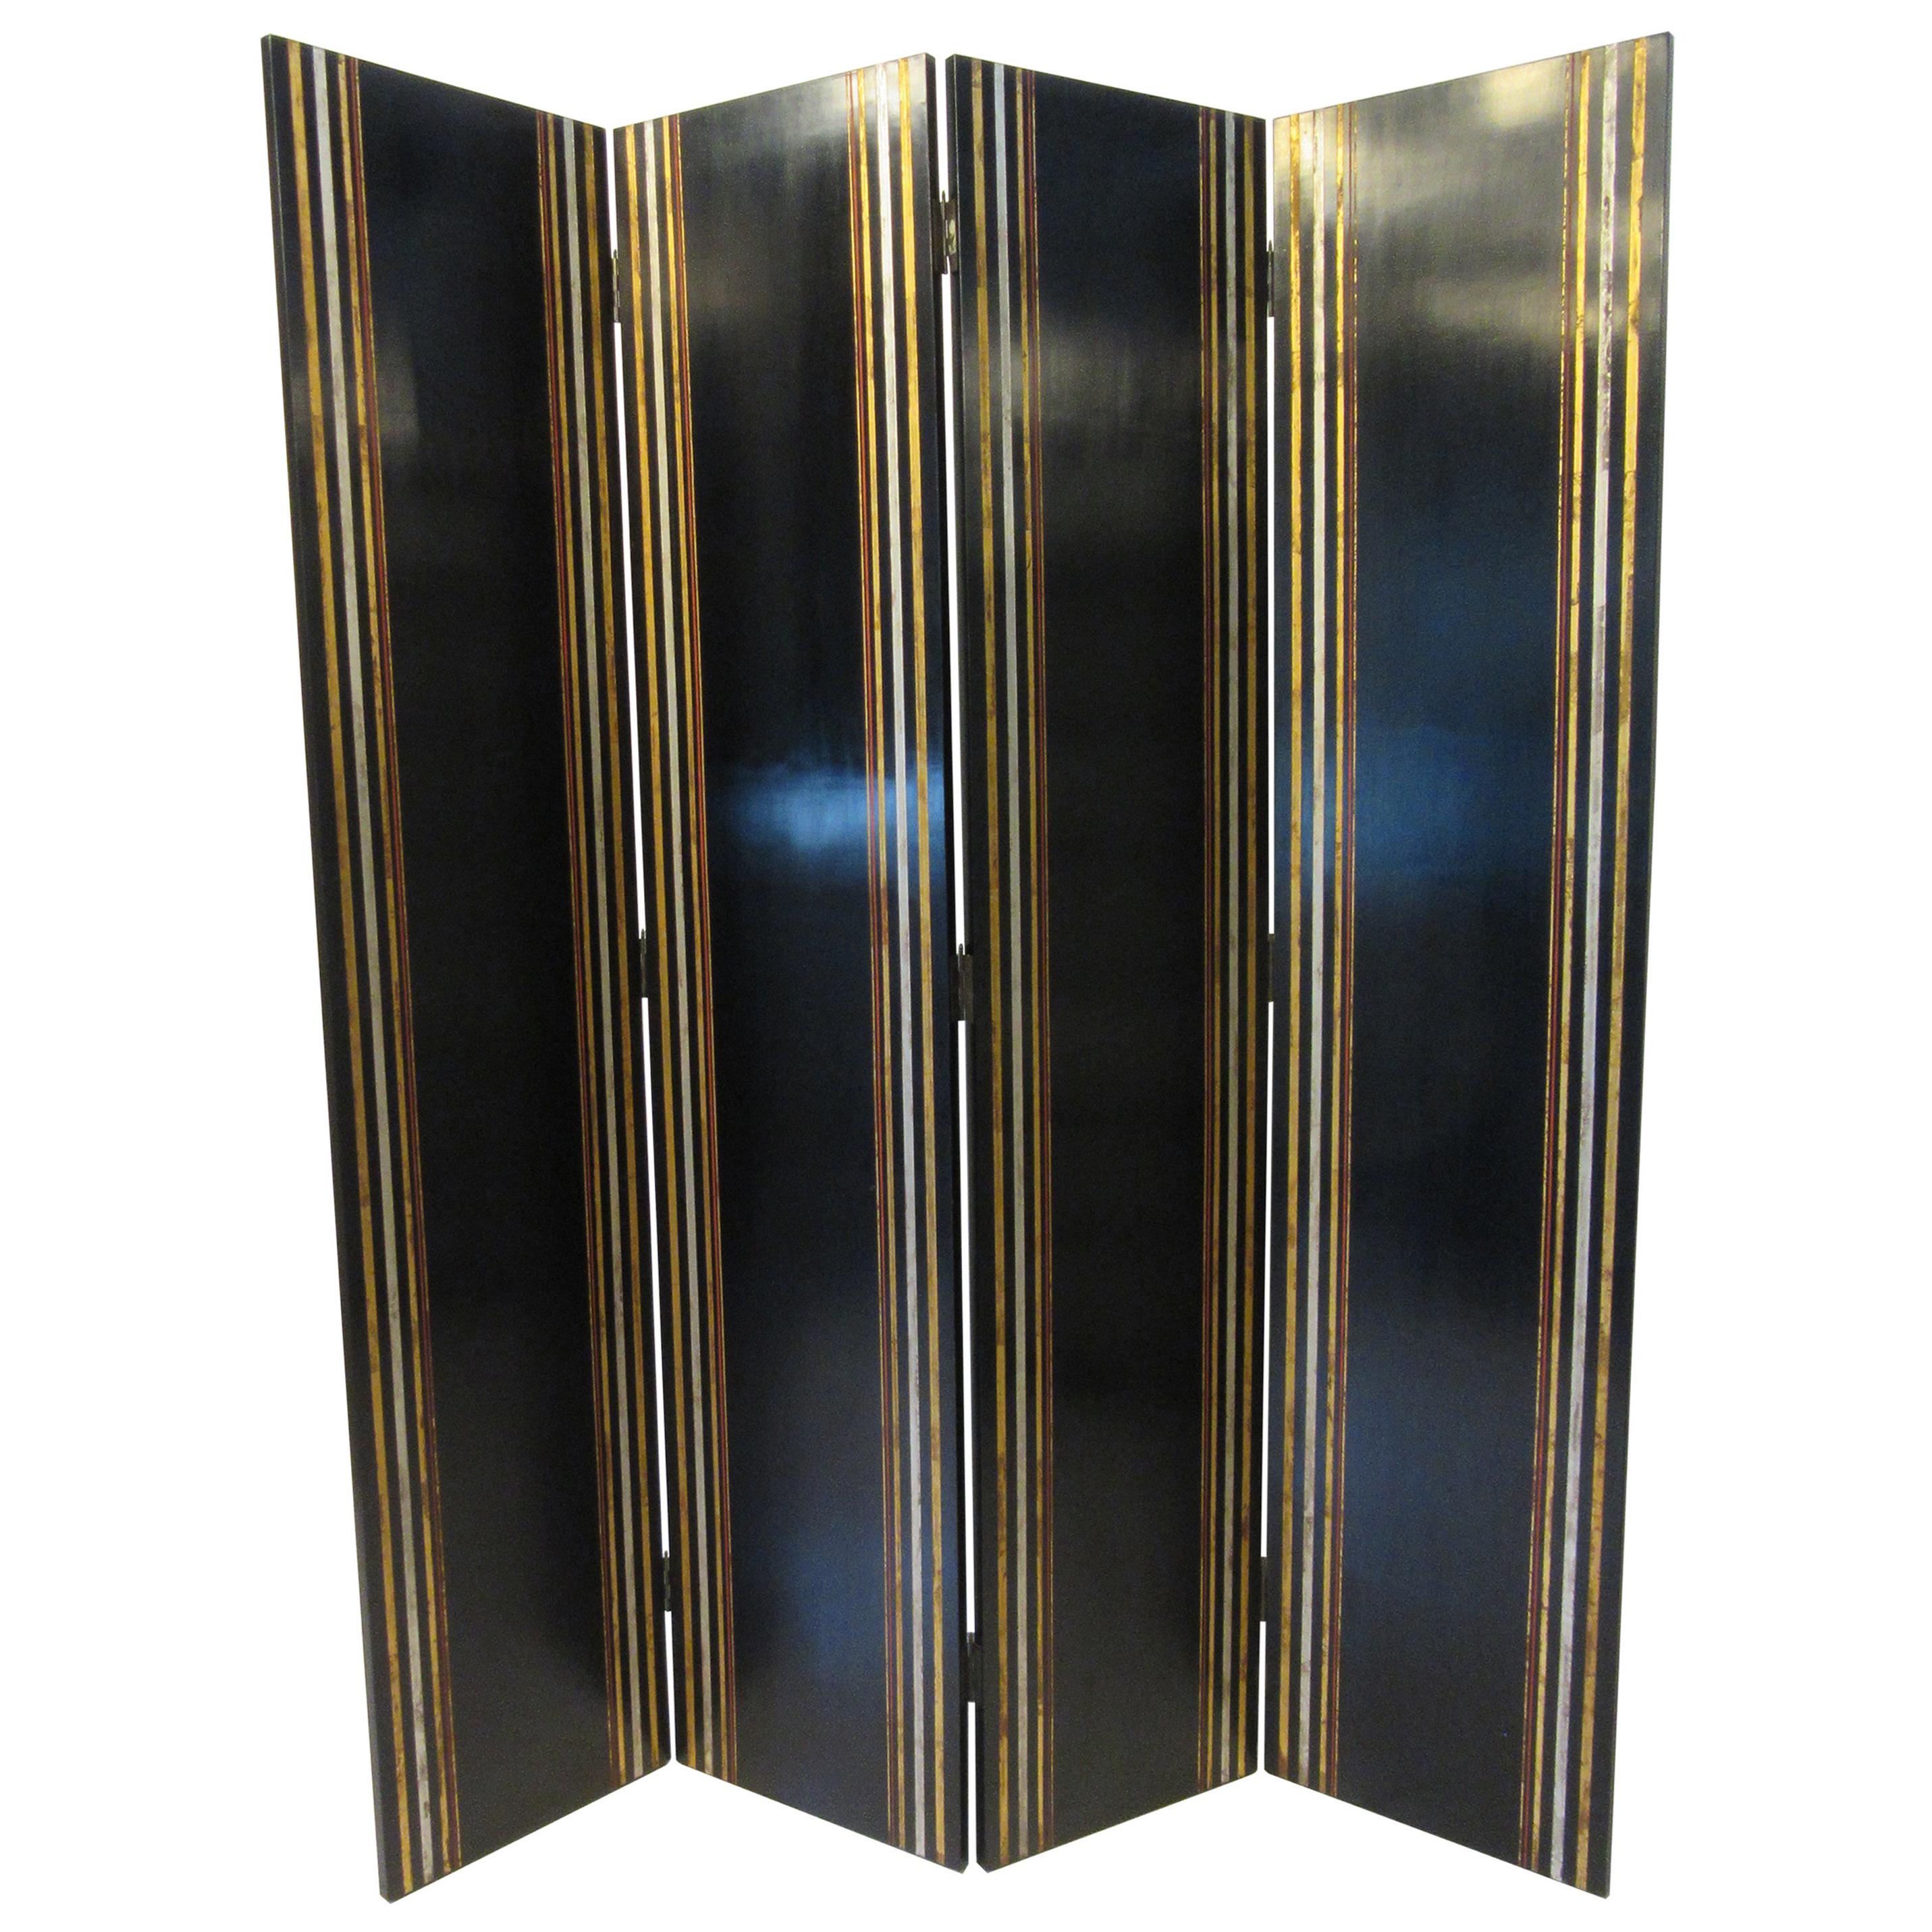 Luxurious Large 4 Panel Screen / Divider by Maitland Smith